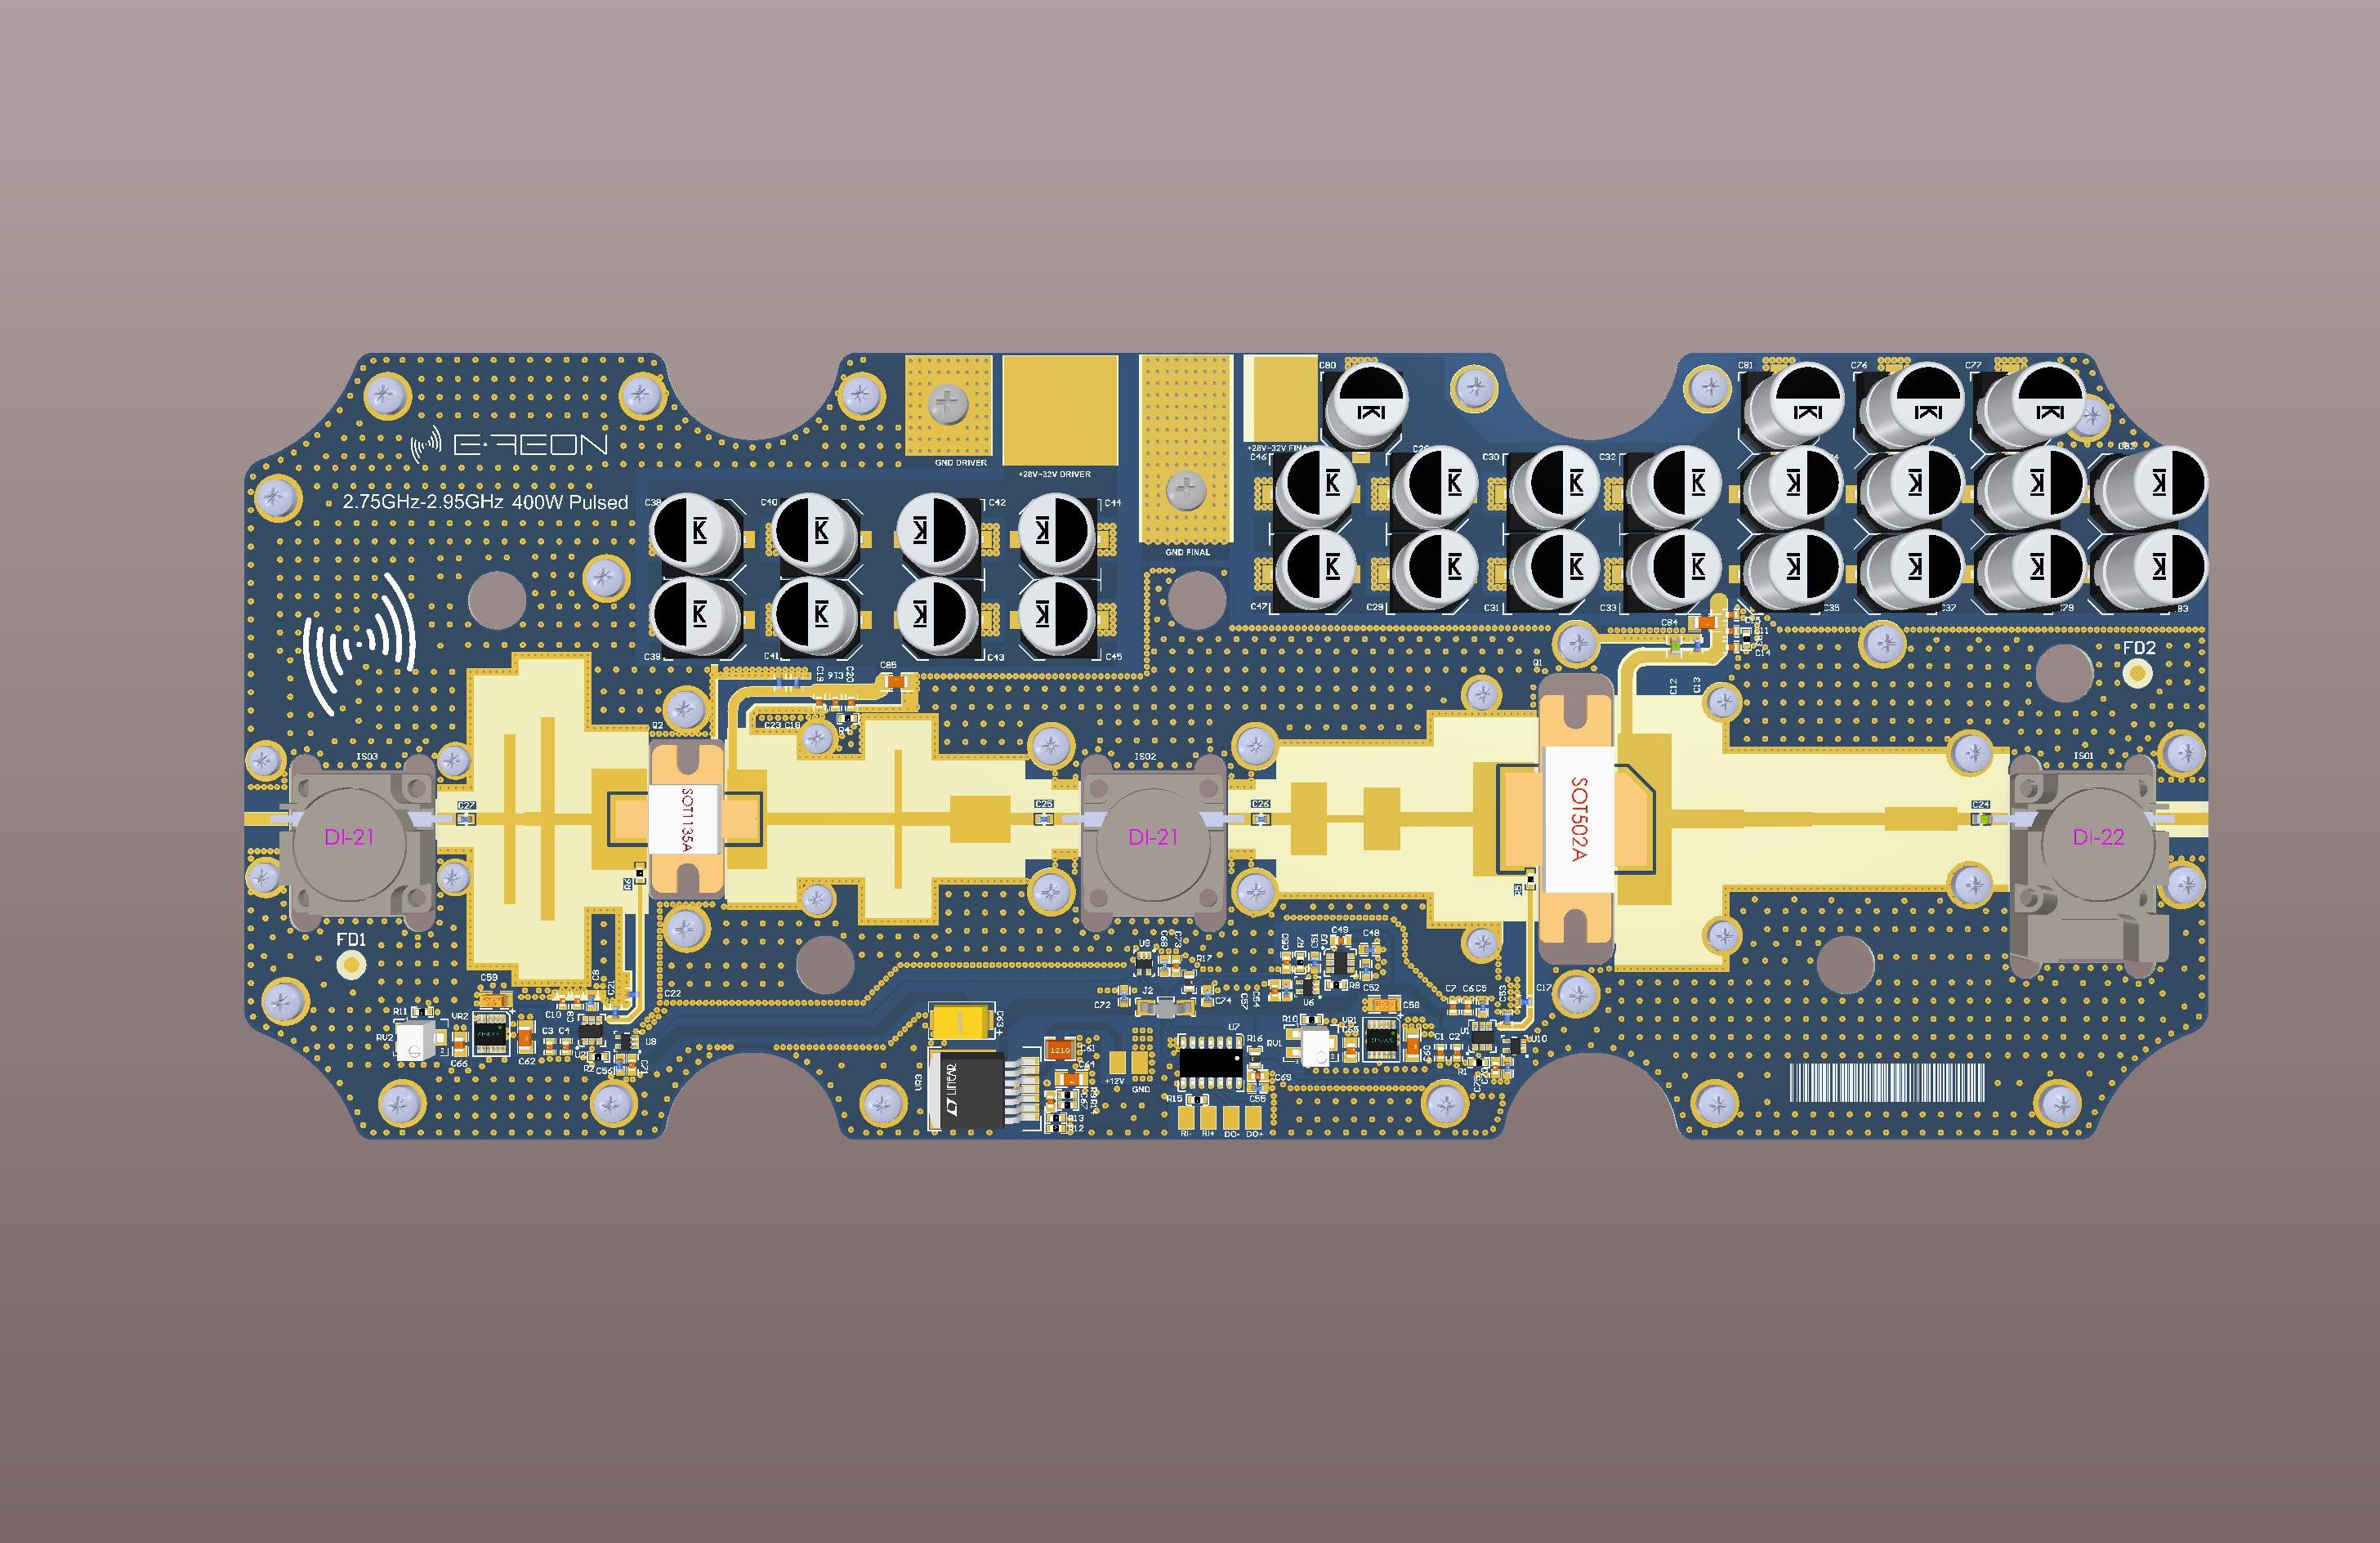 2.7 GHz to 3.1 GHz layout S-Band module